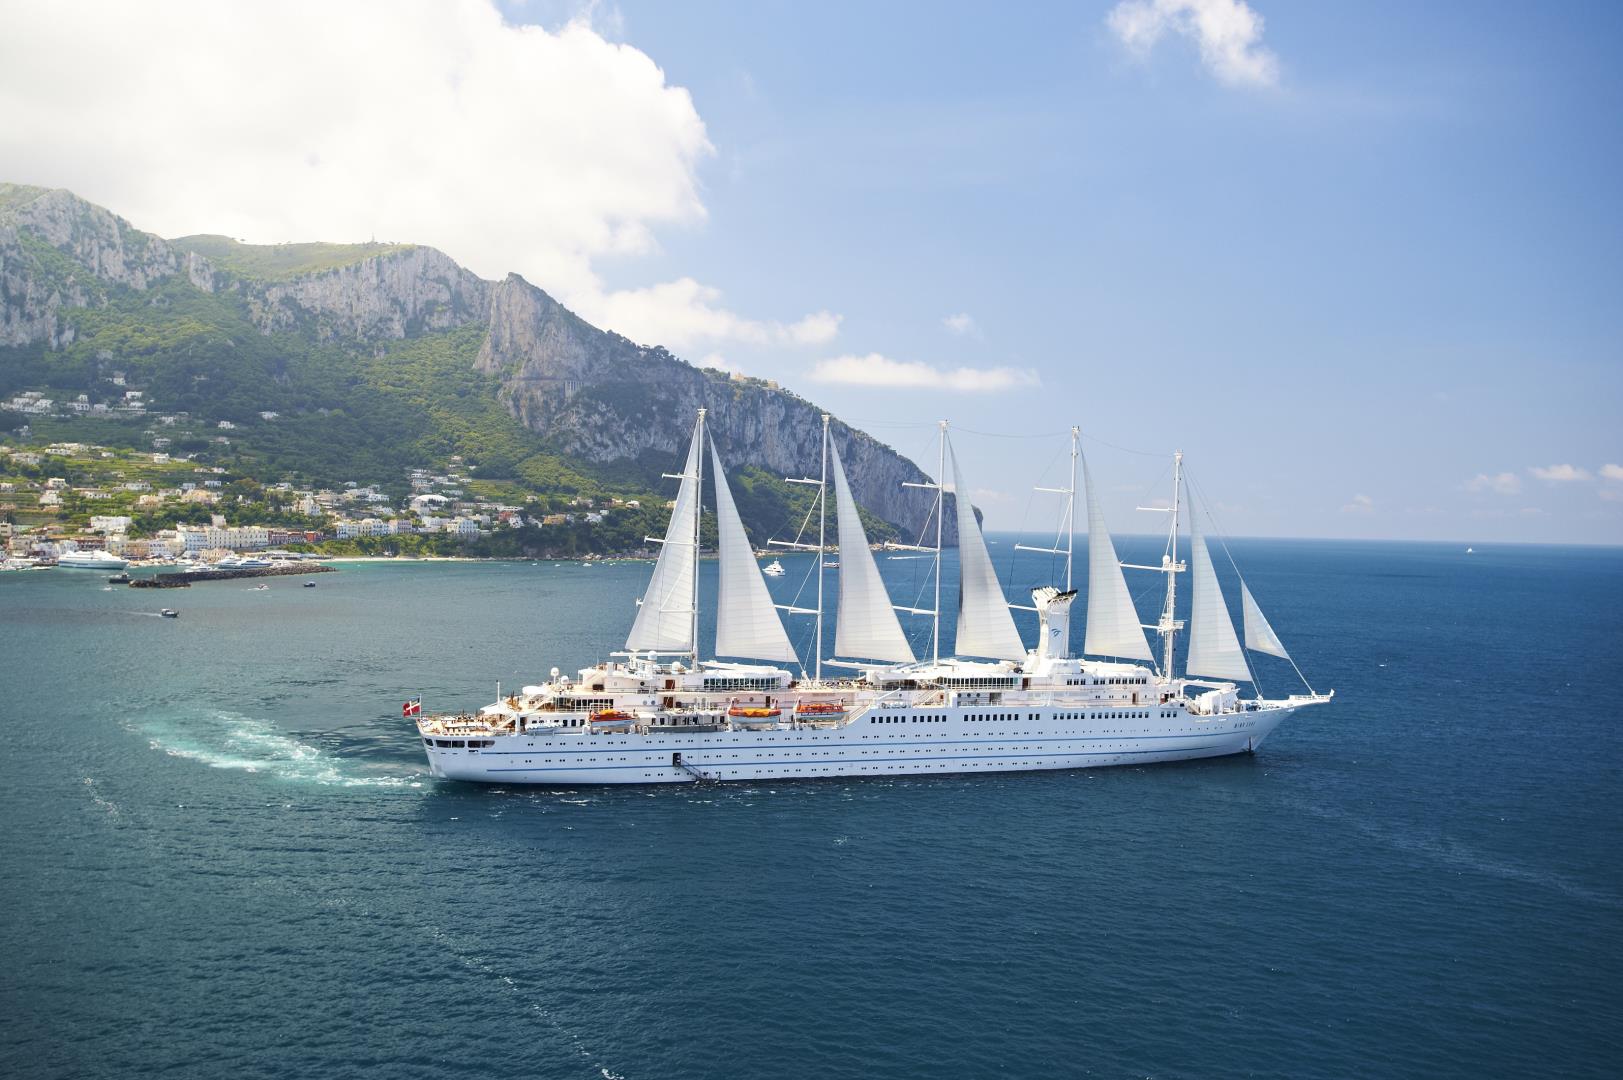 Exterior view of Wind Surf sailing near Capri, Italy - Photo Credit: Roger Paperno